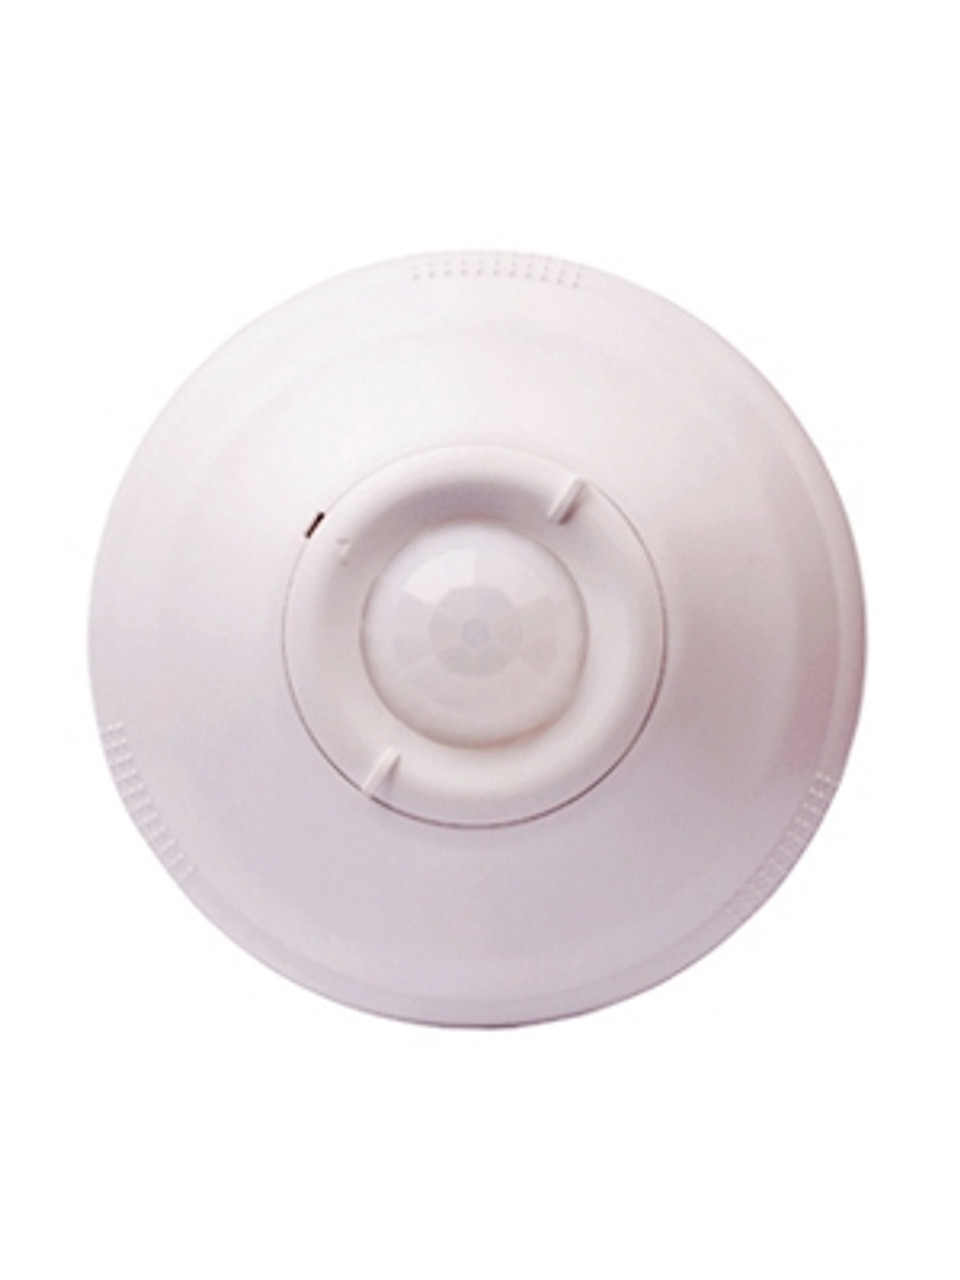 Features
• Passive Infrared (PIR) Technology
• Replaces a standard light or fan single-pole switch
• Automatic ON /OFF operation
• Neutral required
• Adjustable time delay from 15secs~30mins
• Works with most common lighting types
• California Title 24 compliant
• Two years warranty

Parameters
• Voltage:120/277VAC, 60Hz
• Coverage: 360°, max.450 ft2
• Load requirements:0-800W/0-1200W Incandescent, fluorescent, indicate LED lamp, compact fluorescent(CFL), magnetic low-voltage(MLV) and electronic low-voltage(ELV)

Standards and Certifications
• UL & CUL Listed.
• ISO9001 registered manufacturing facility